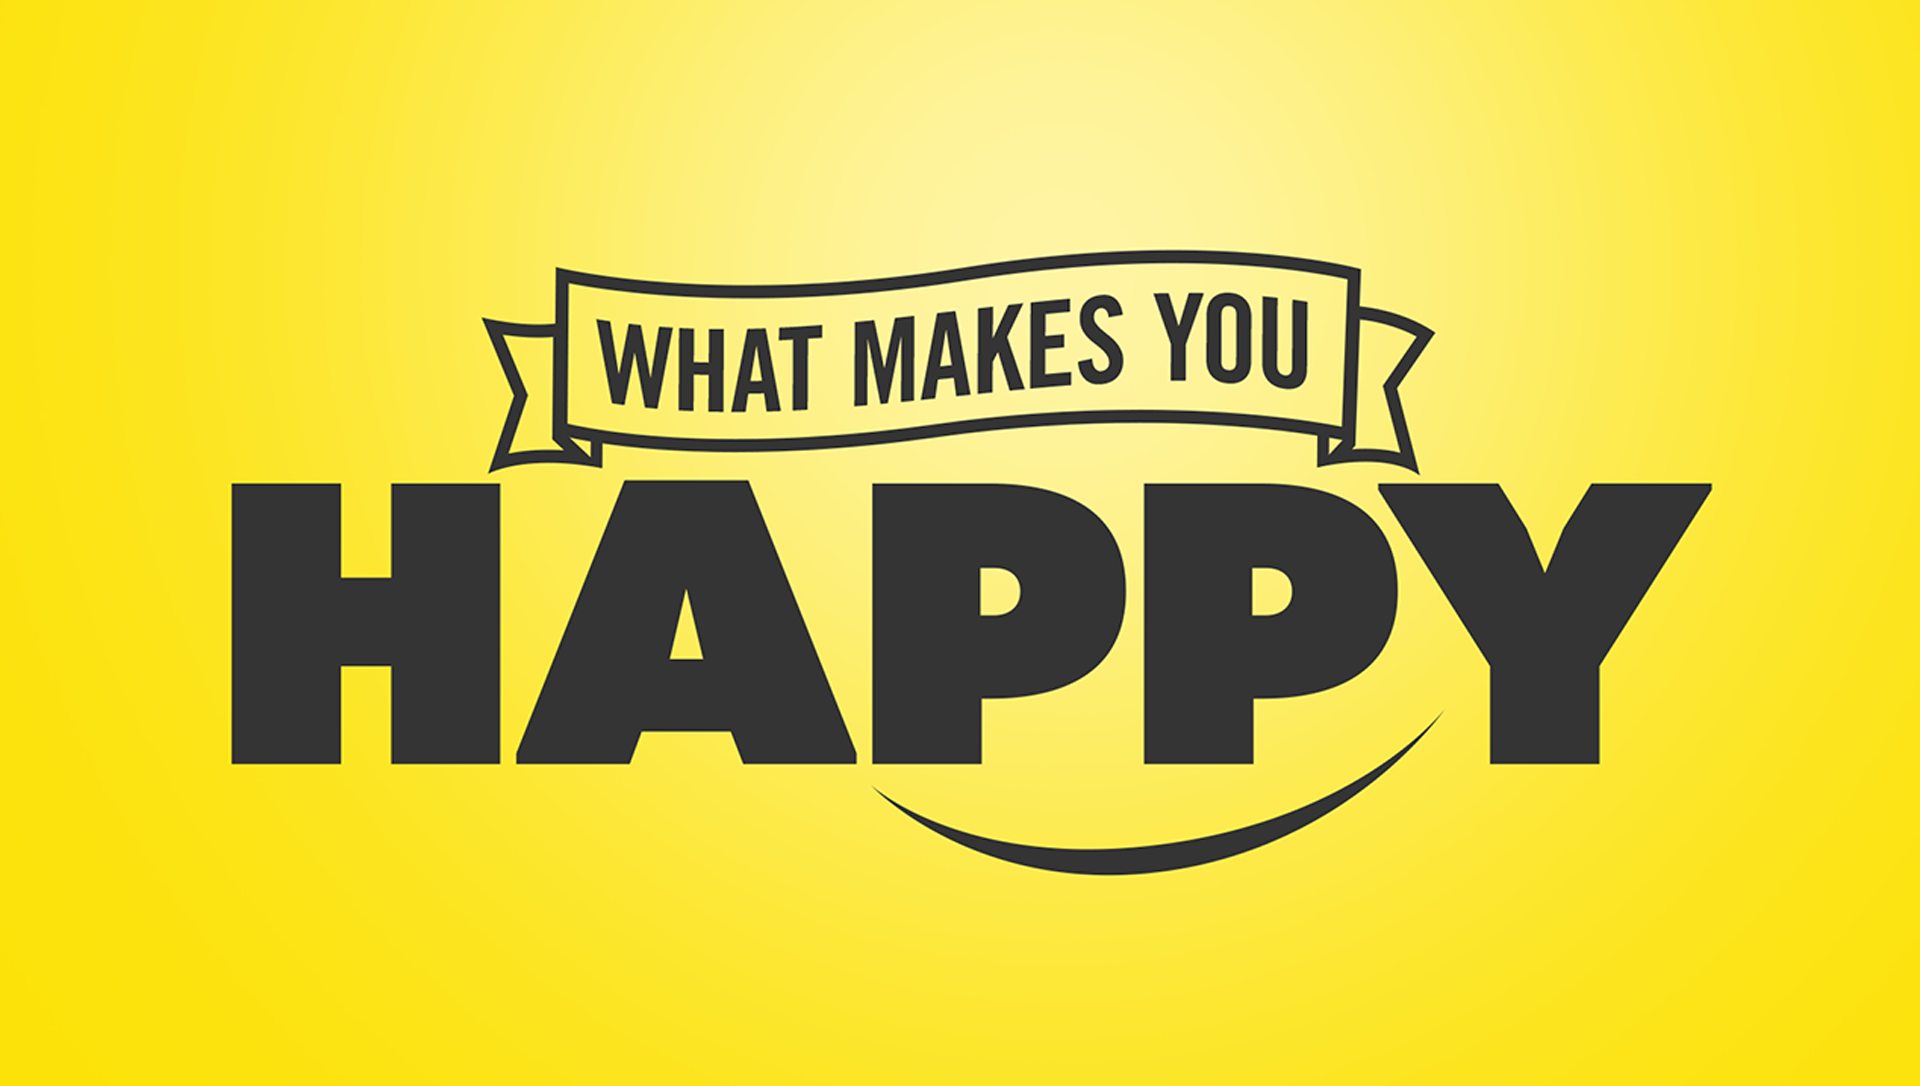 Everybody were happy. What makes you Happy. What makes me Happy. Makes you Happy. What makes people Happy.